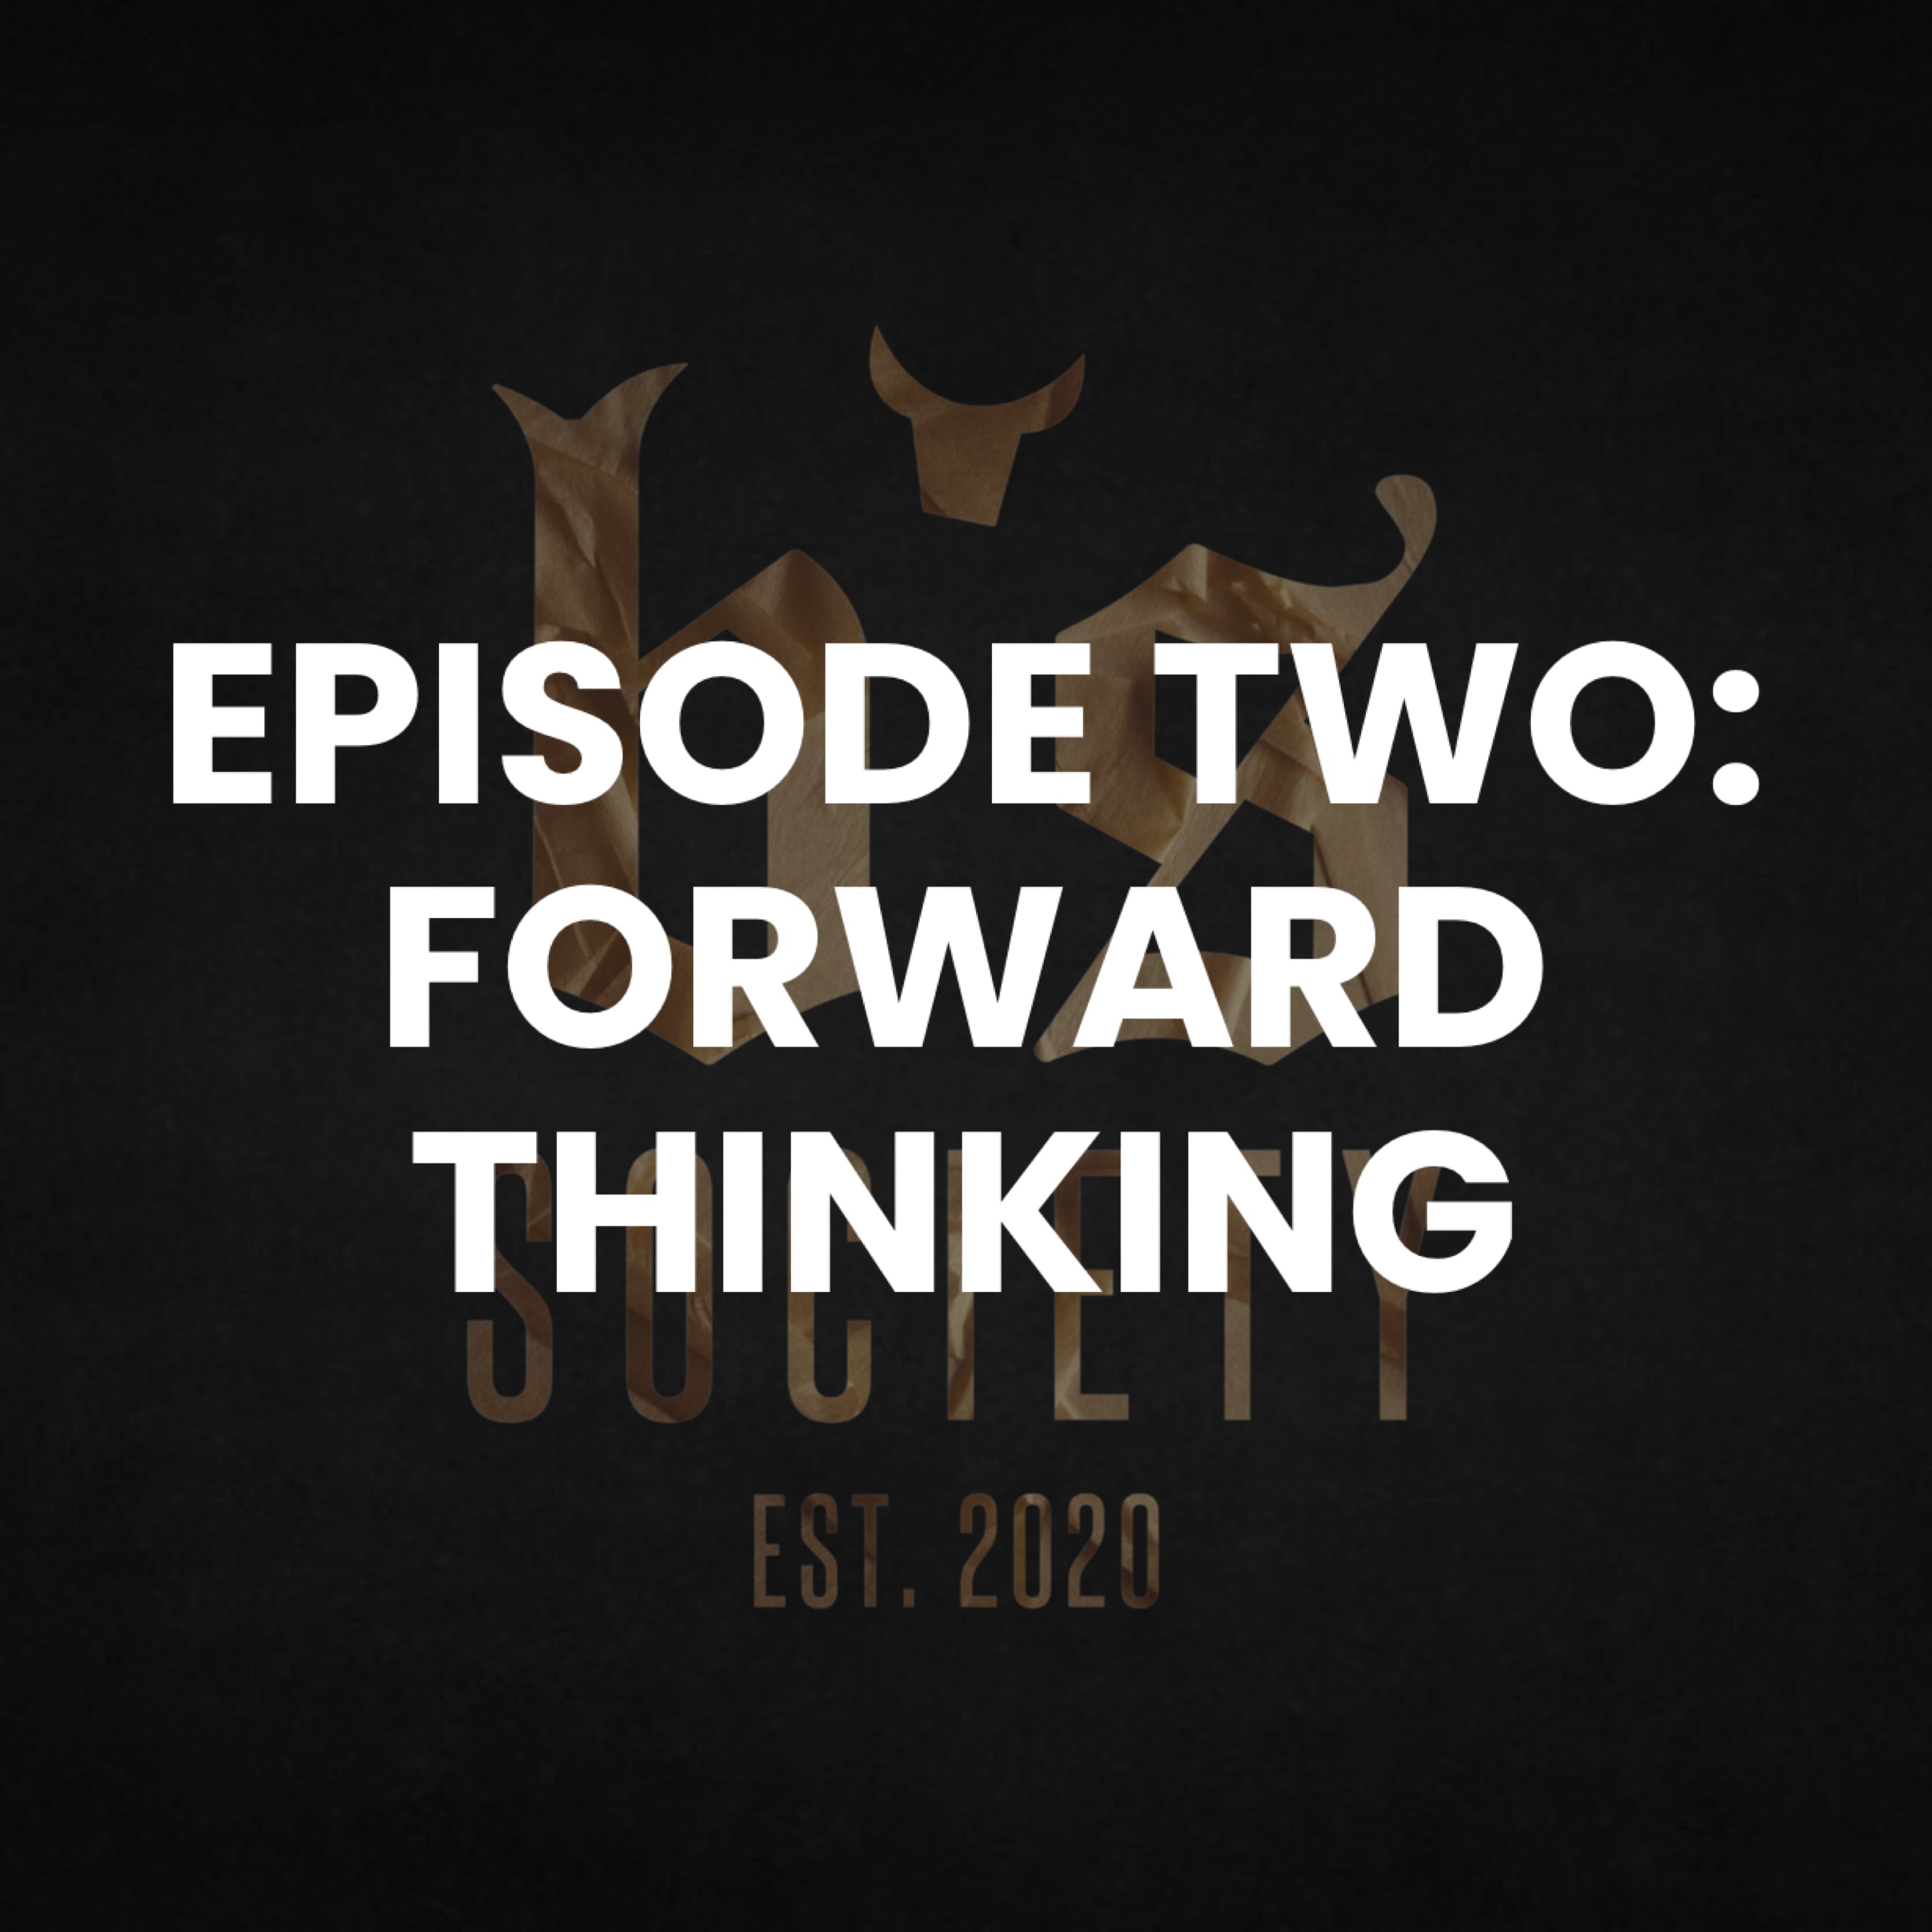 EPISODE TWO: LOOKING FORWARD